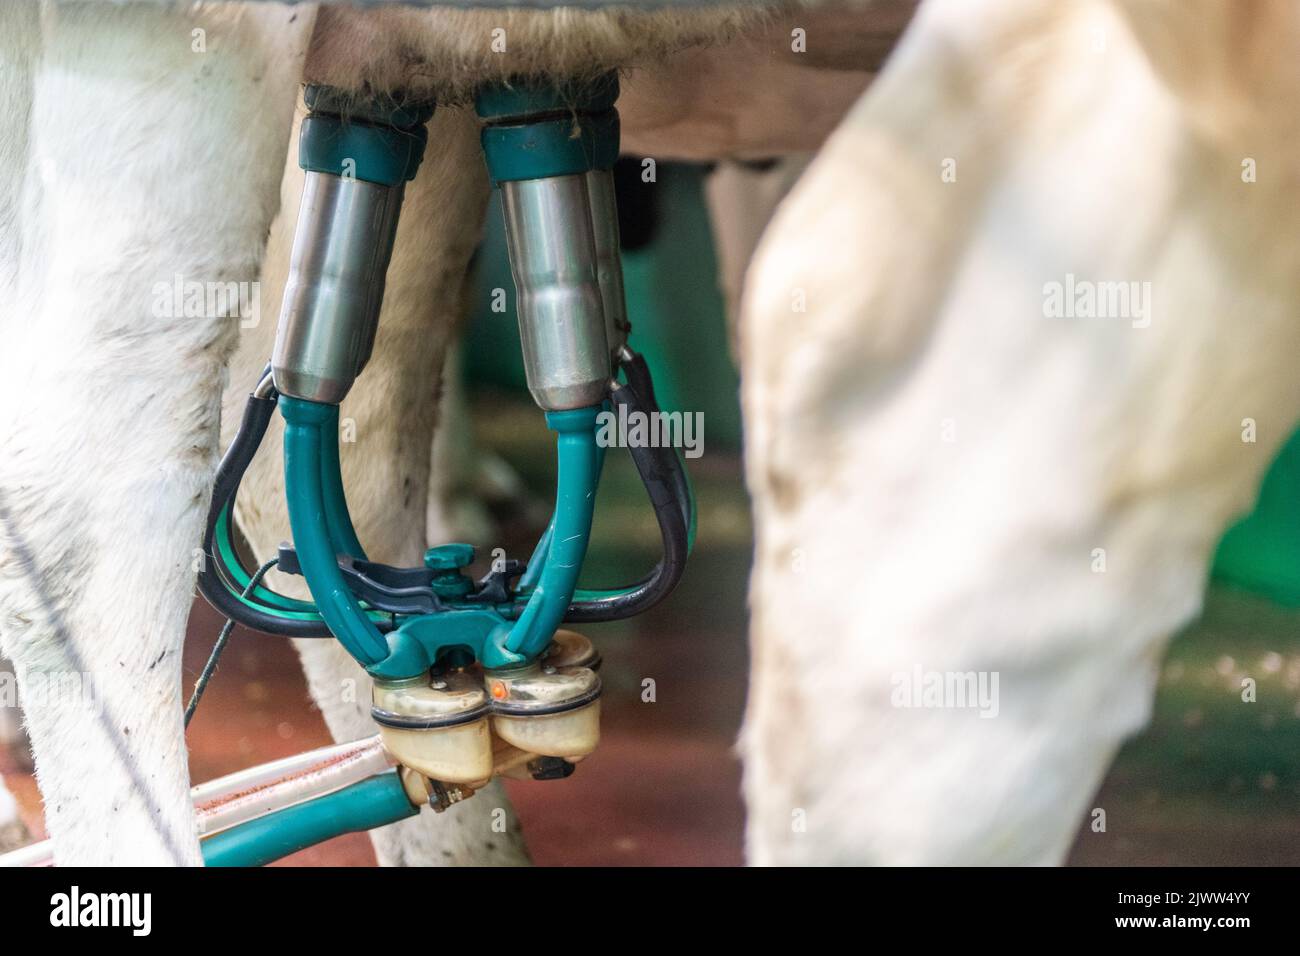 Farming: Timoleague, West Cork, Ireland. 6th Sept, 2022. The 160 strong herd of dairy farmer DJ Keohane  are milked at his farm in Timoleague, West Cork. DJ's son, Daniel aged 11 and daughter Clíodhna, 15 help with the milking. The parlour holds 20 cows each side and milking is completed within an hour. DJ is currently yielding approx. 20 litres per cow. Credit: AG News/Alamy Live News. Stock Photo